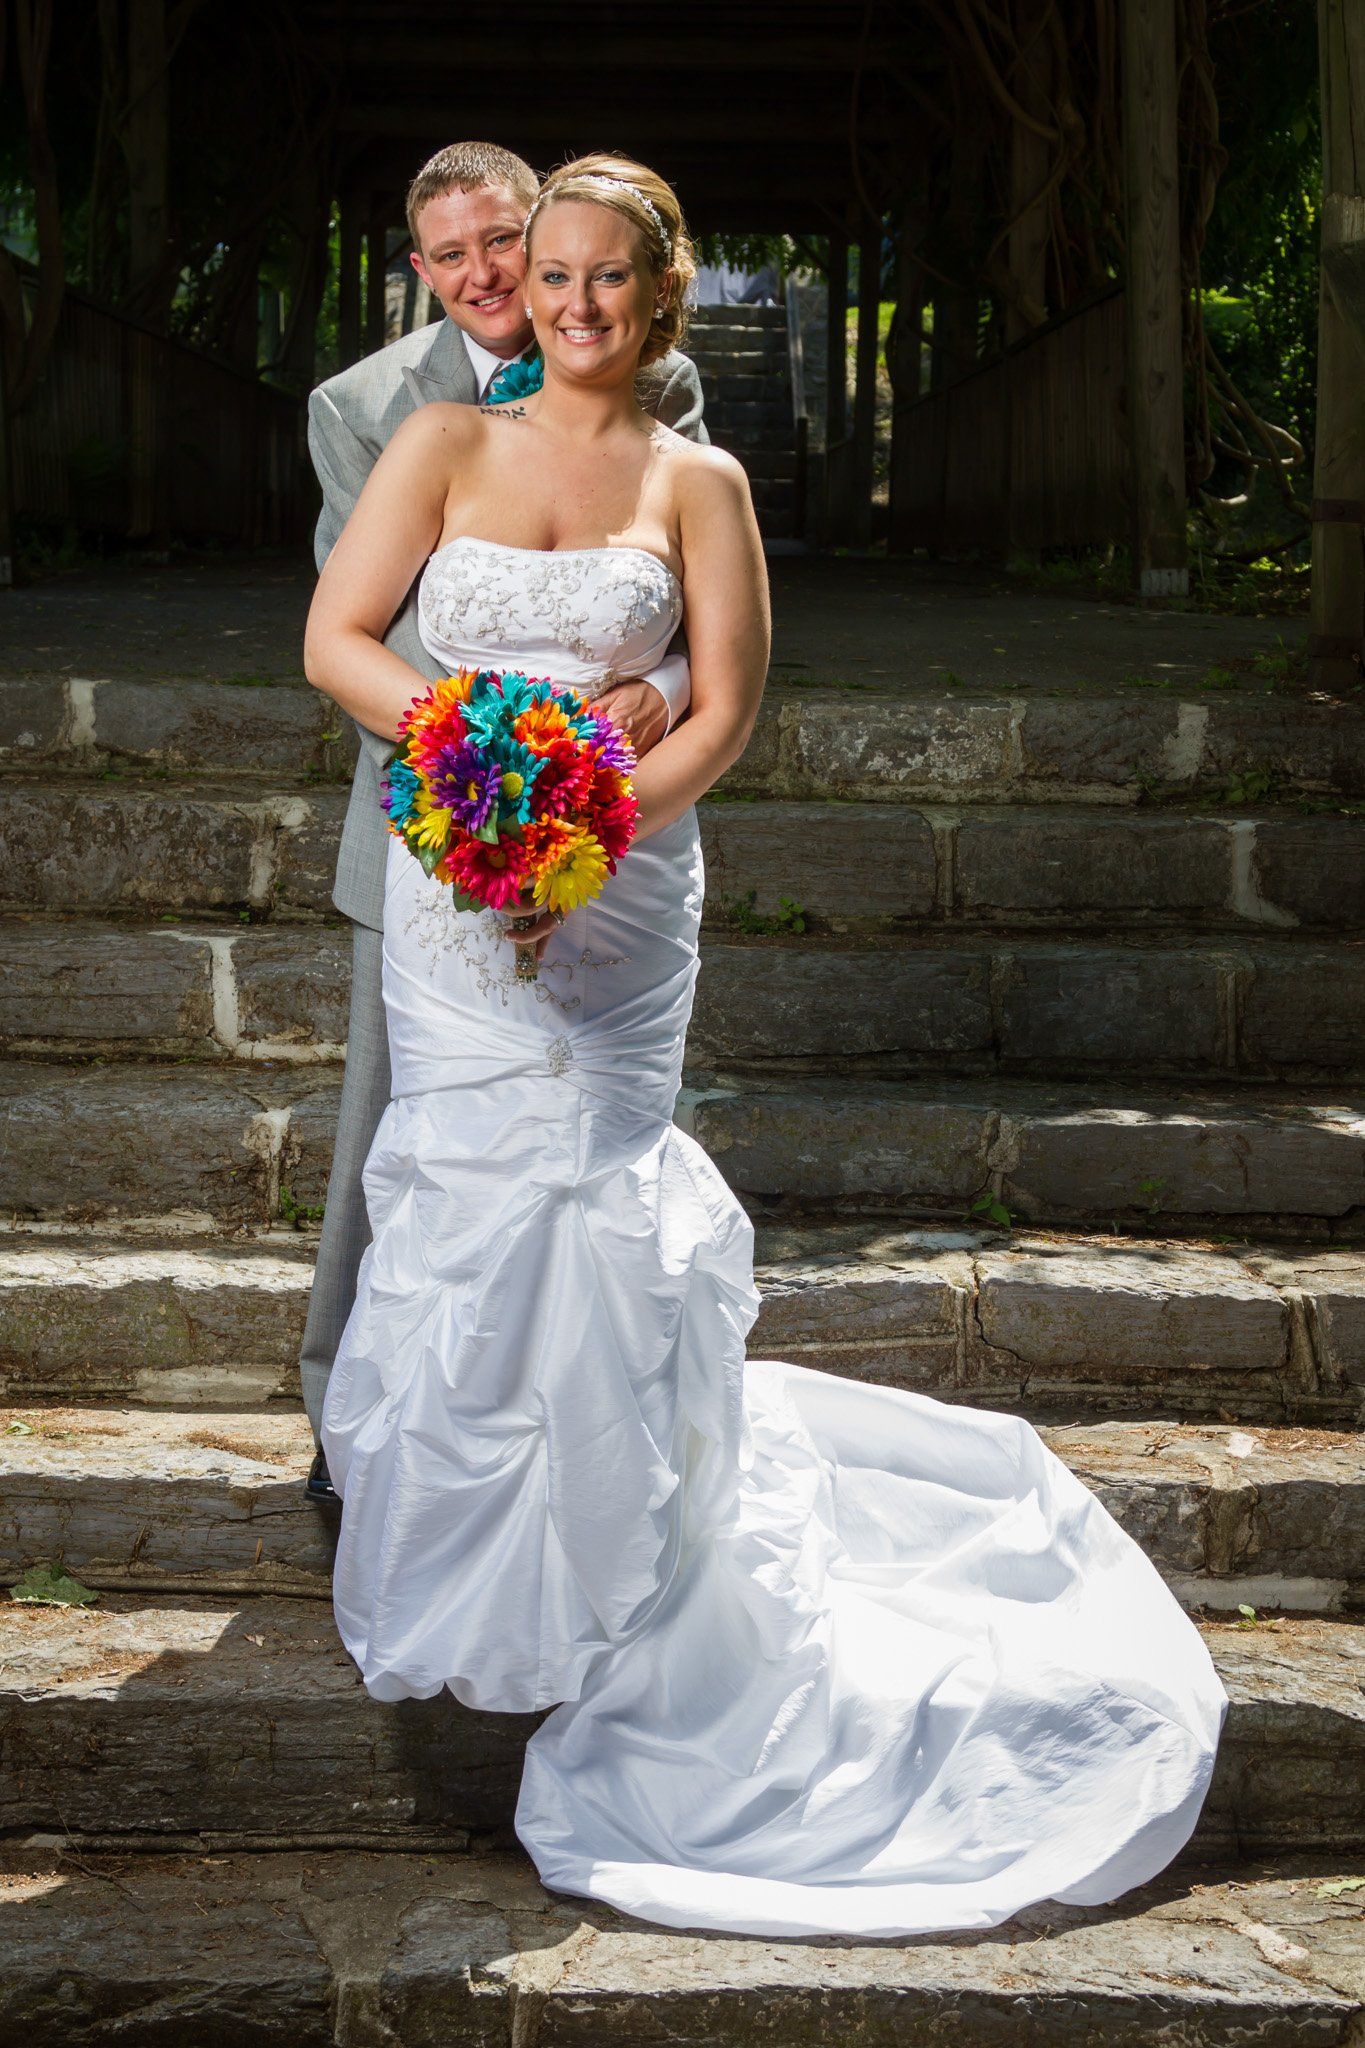 An outdoor portrait of a newly married couple standing together on concrete steps